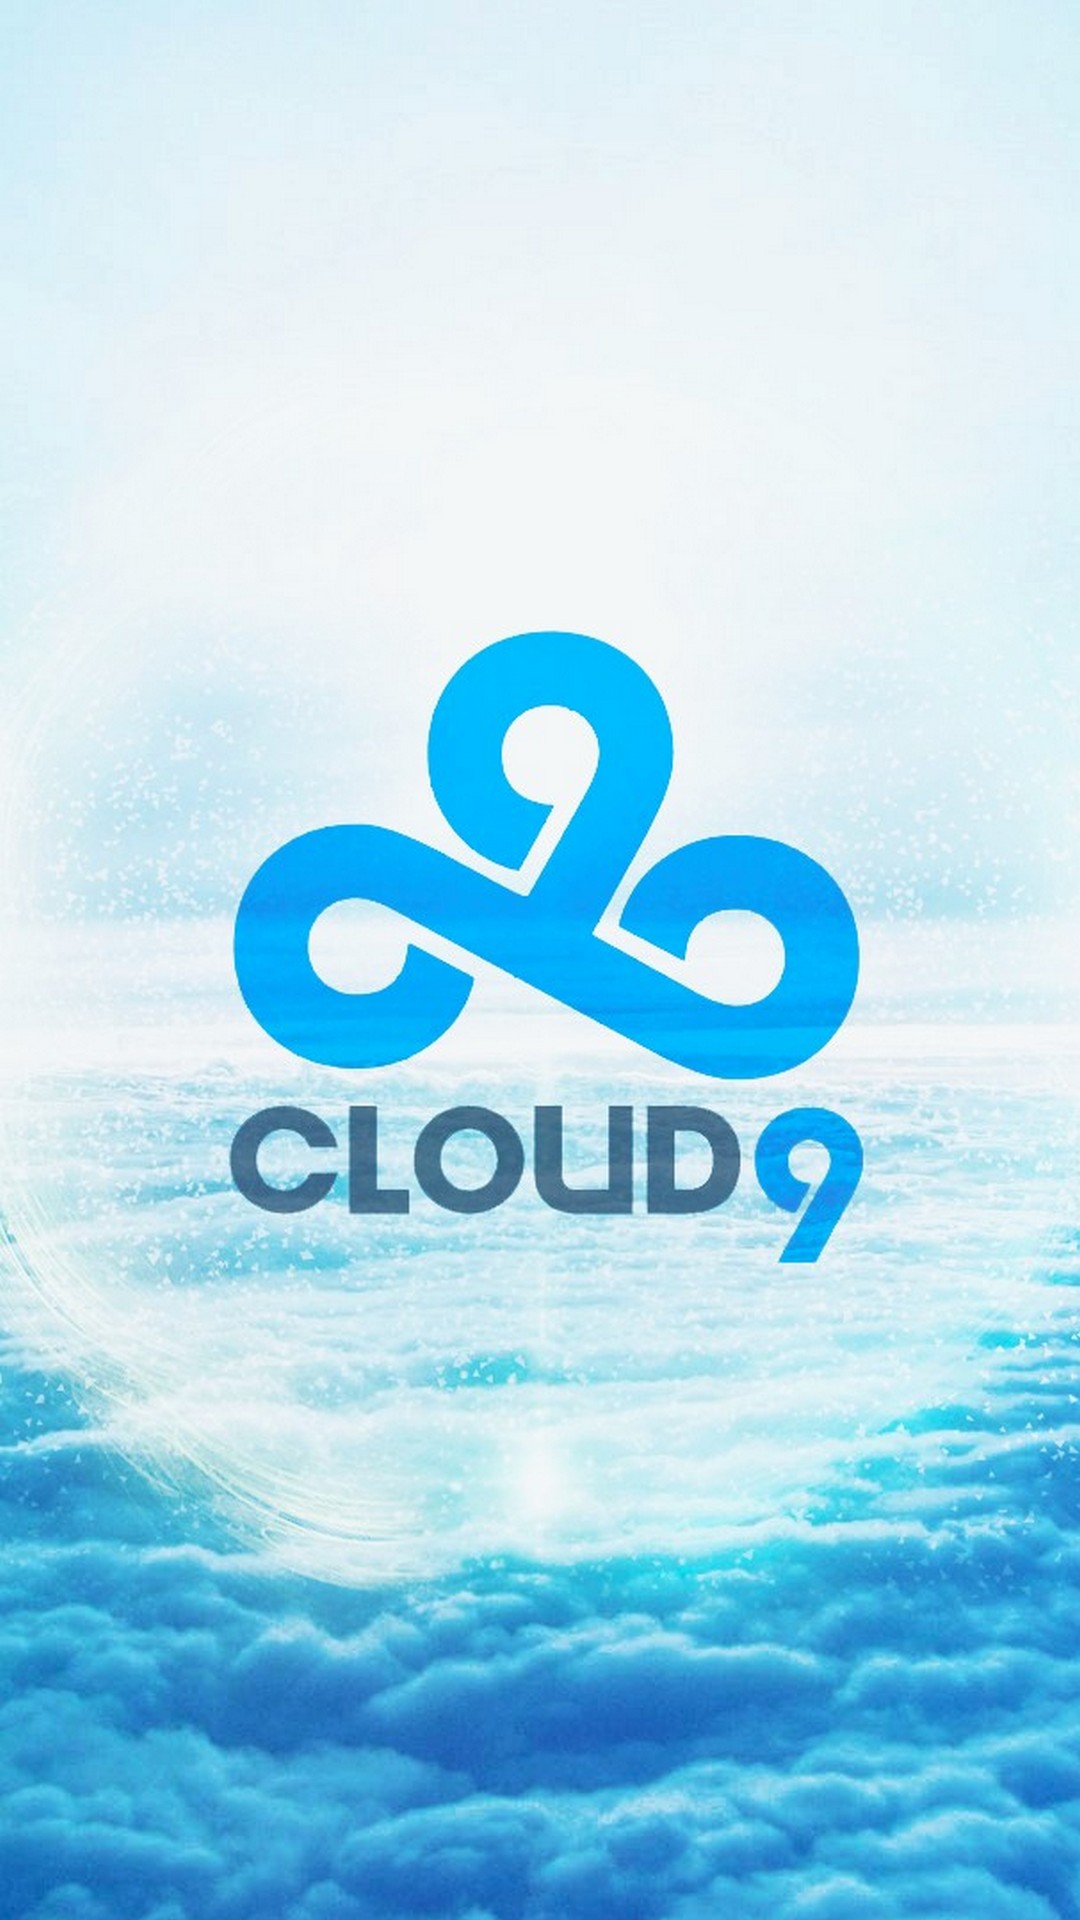 Cloud9 Background For iPhone 8 With Resolution 1080X1920